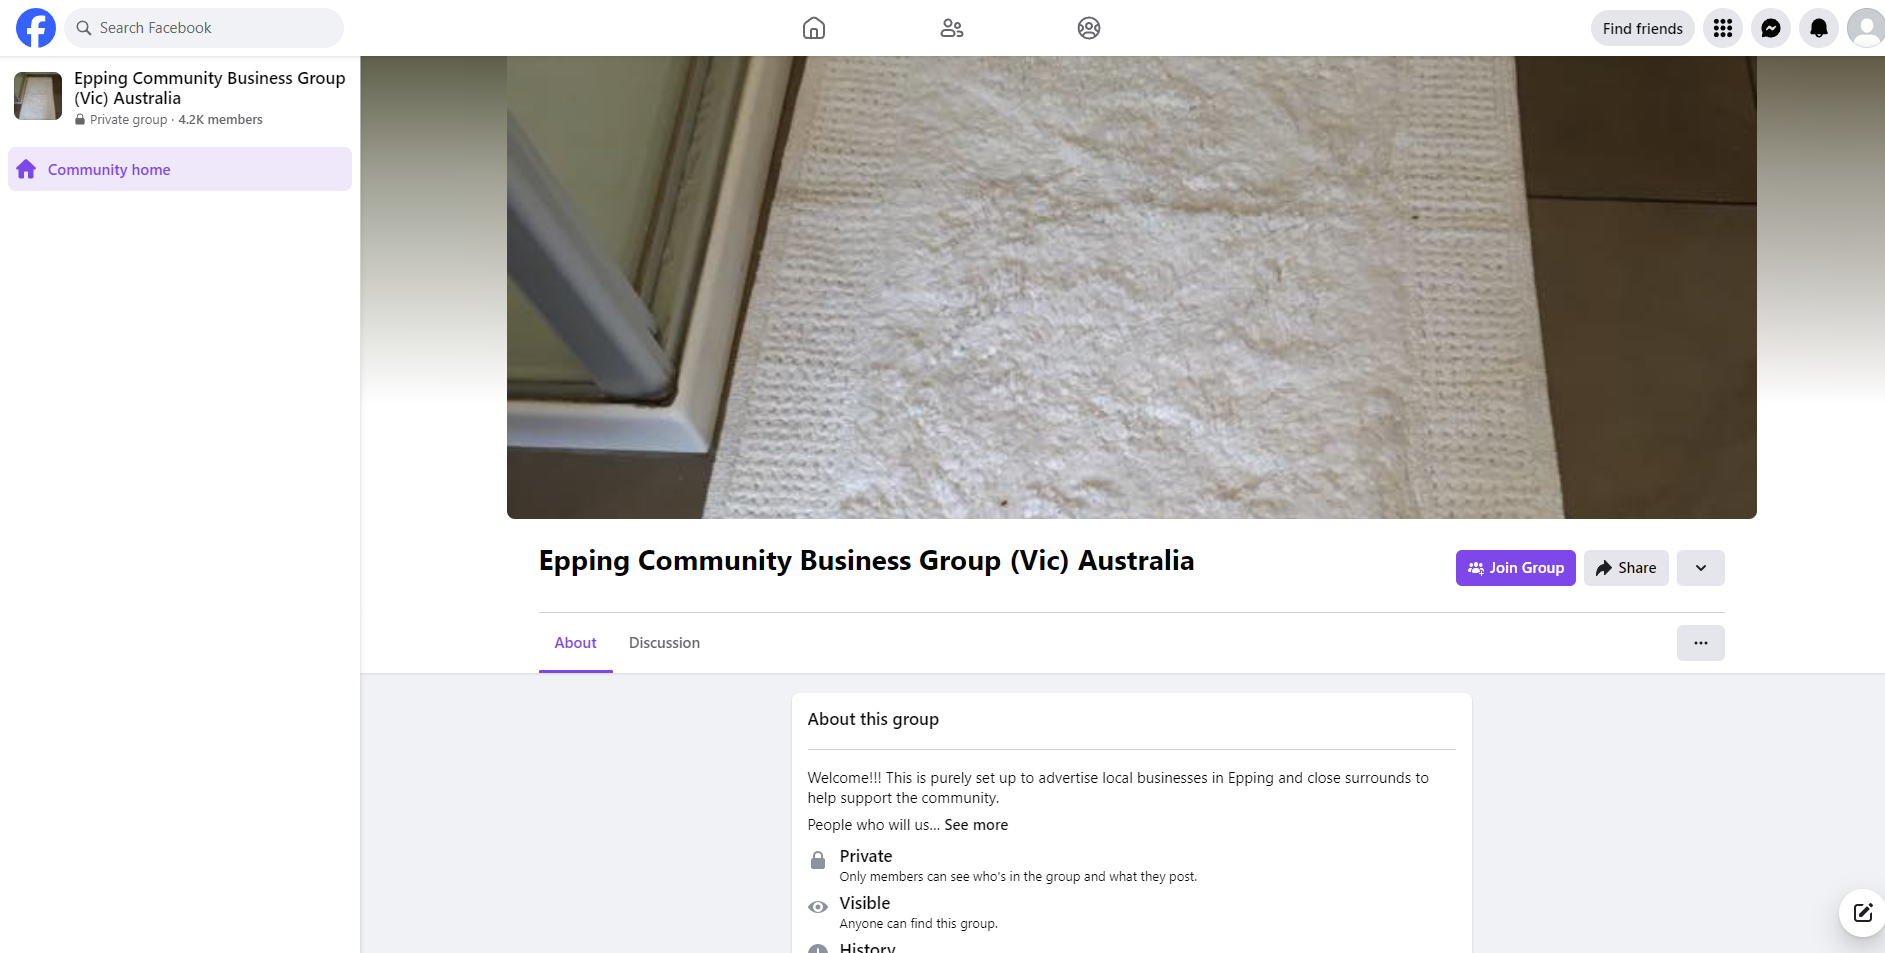 Epping Community Business Group (Vic) Australia